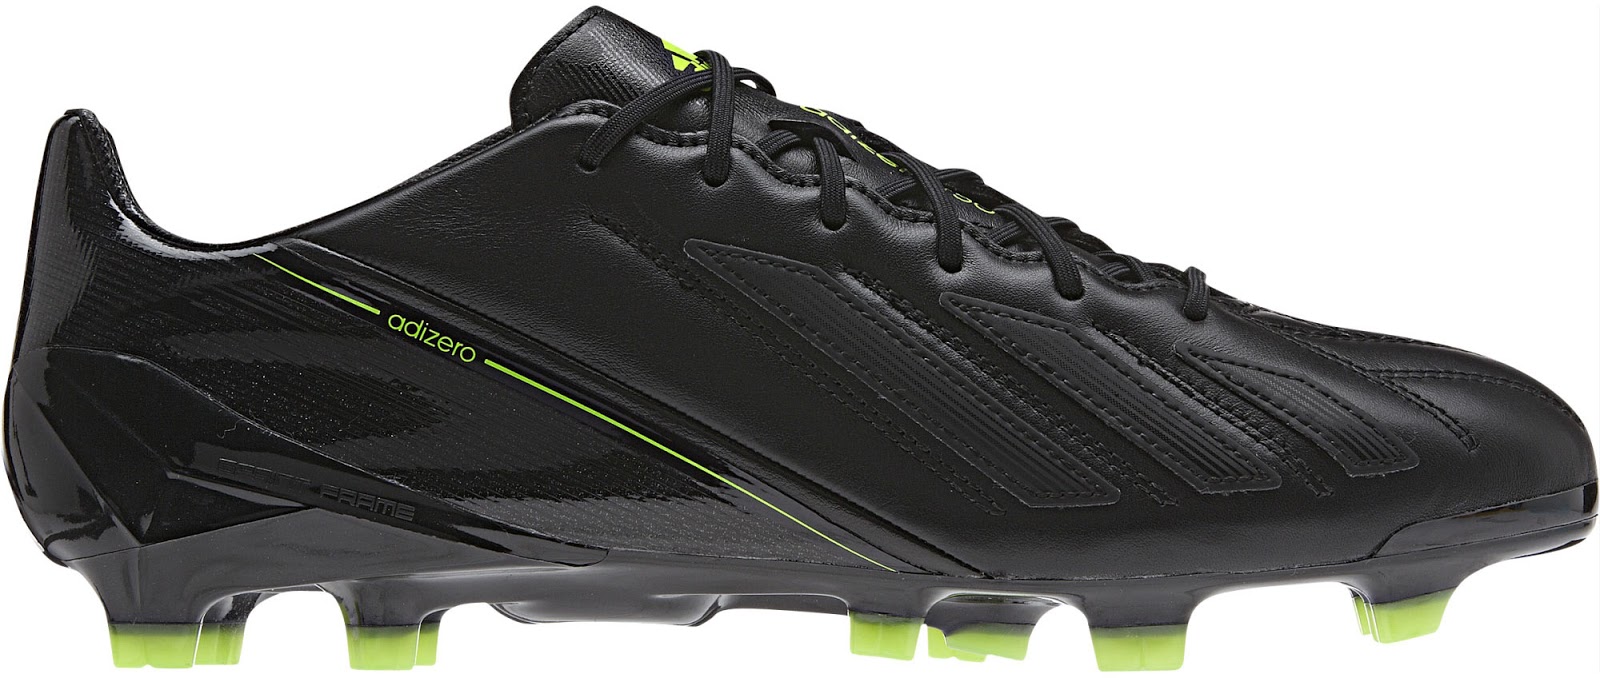 Adidas III Blackout Boot Colorway Released -